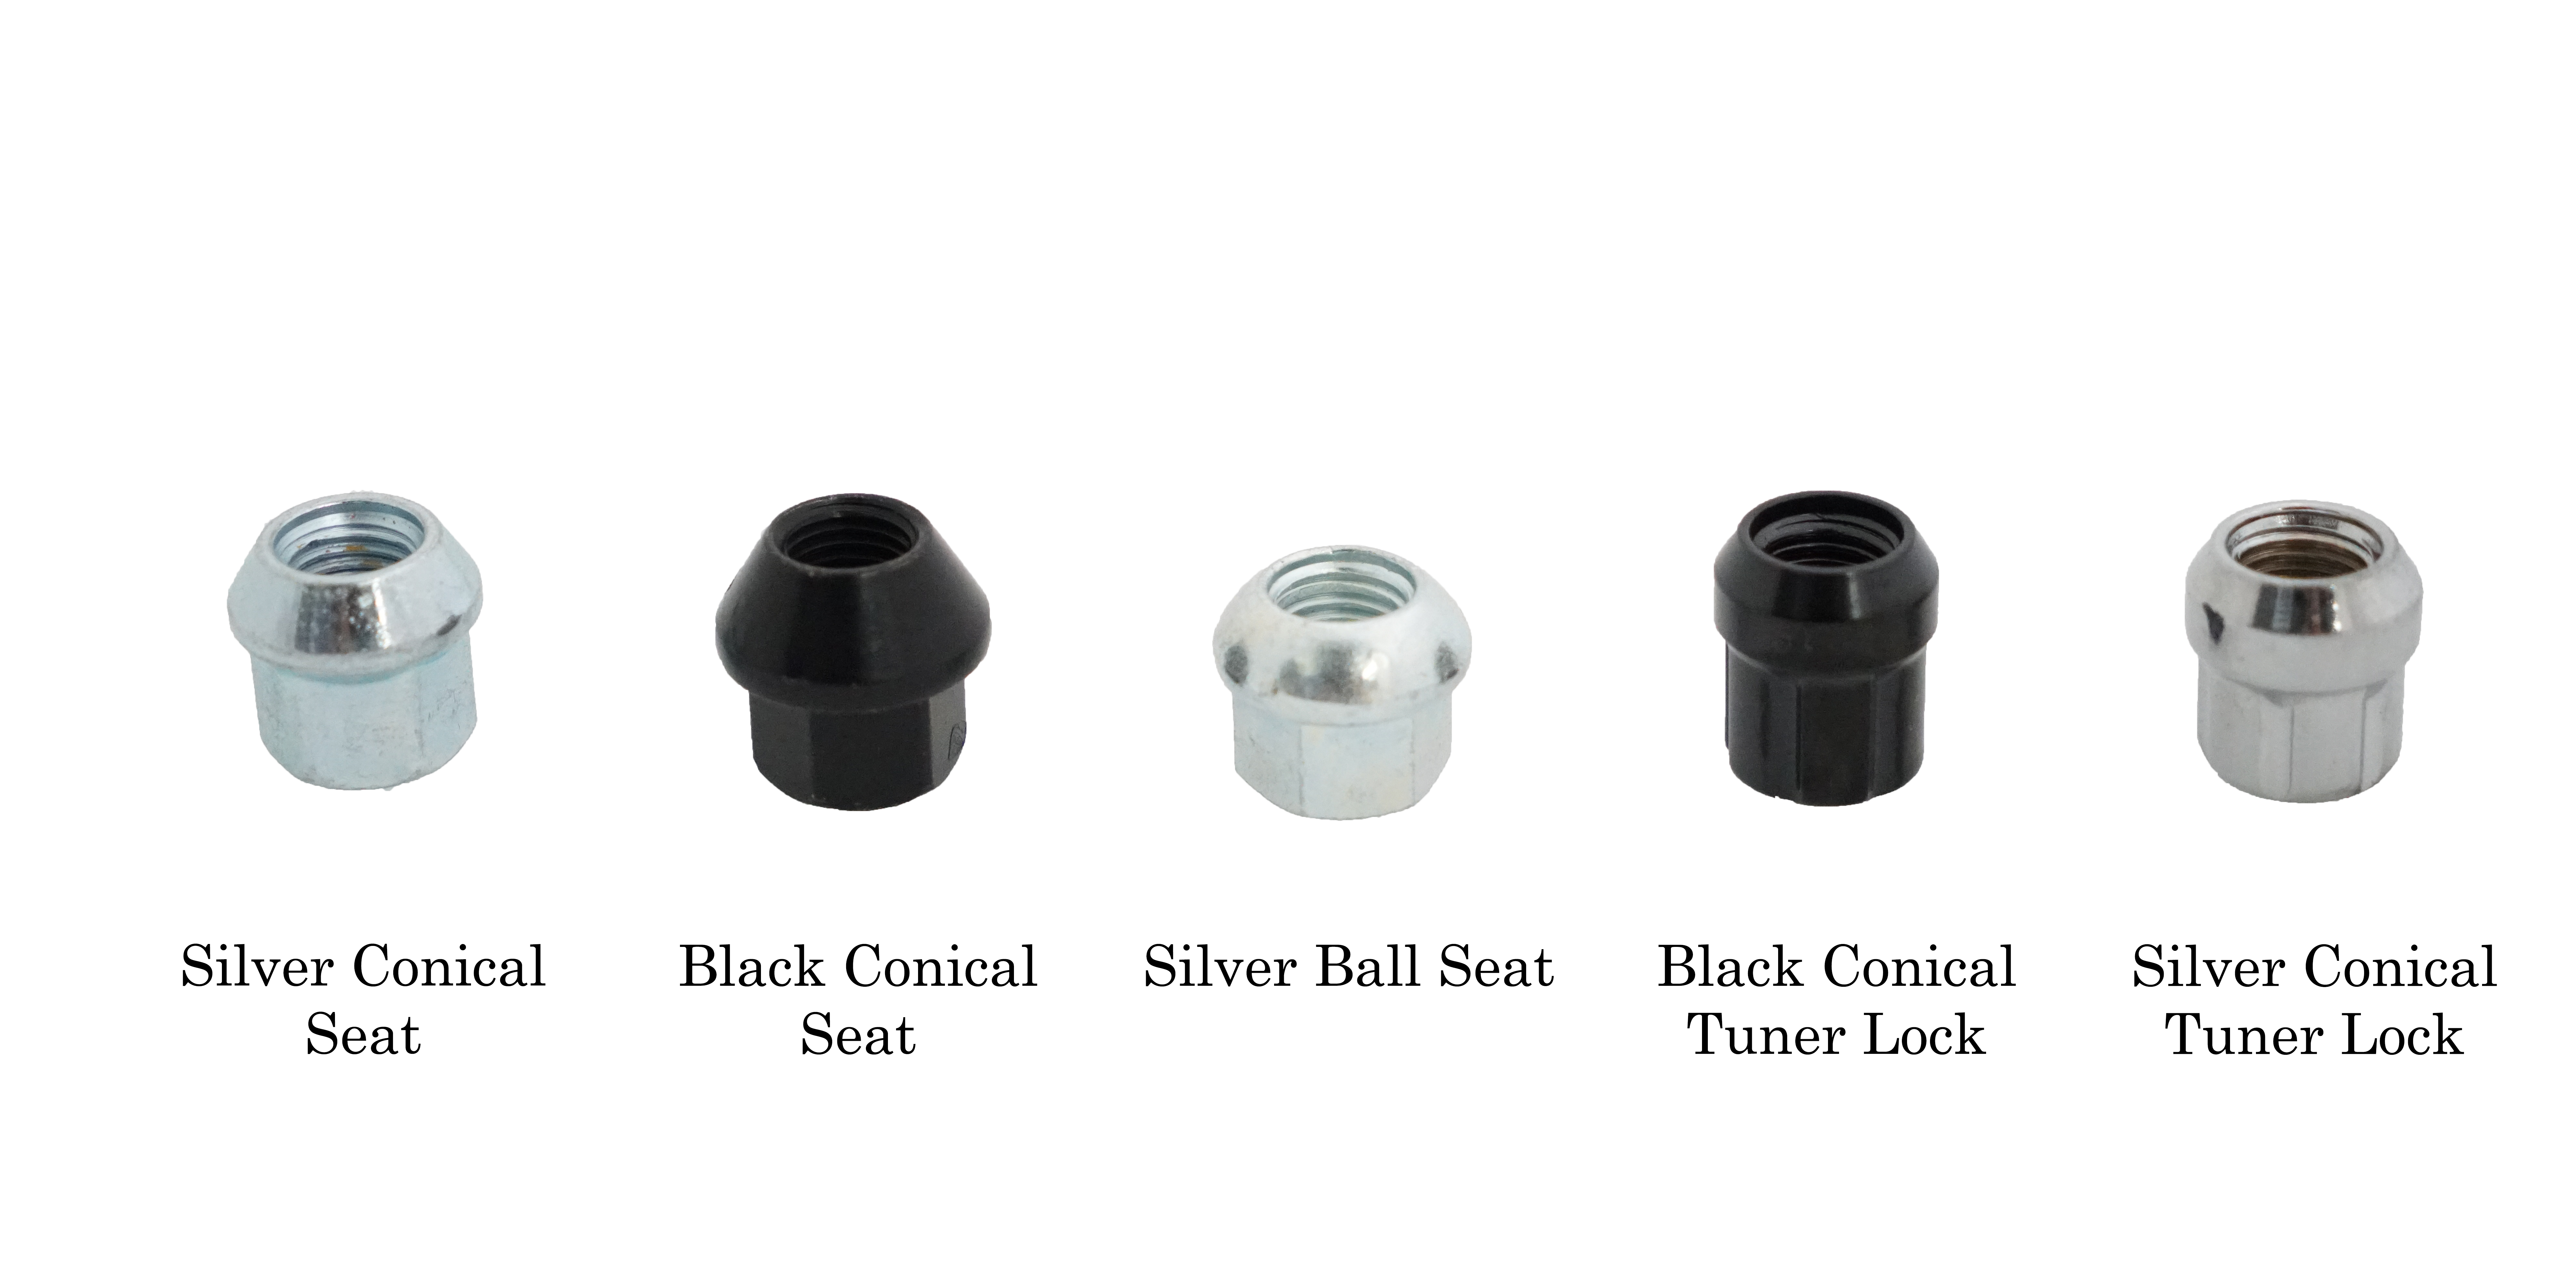 M12 x 1.5 90mm Stud Conversion Kit for Track Day Cars Black 